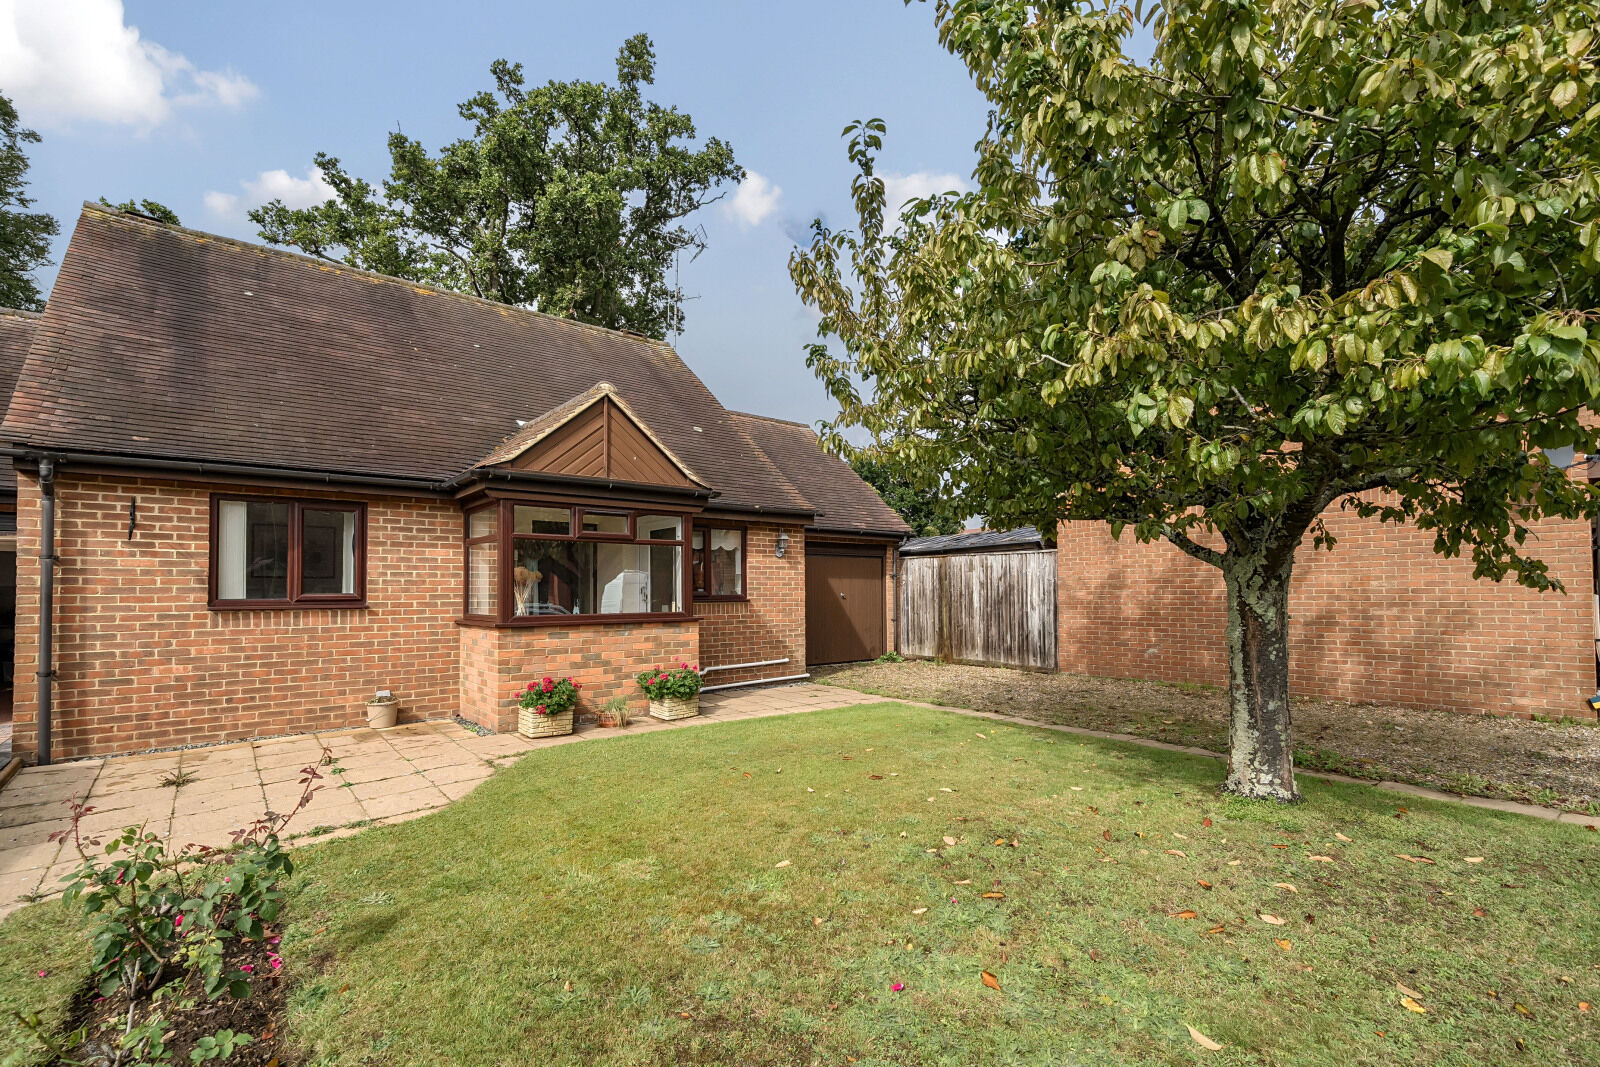 2 bedroom detached bungalow for sale Essex Way, Sonning Common, RG4, main image